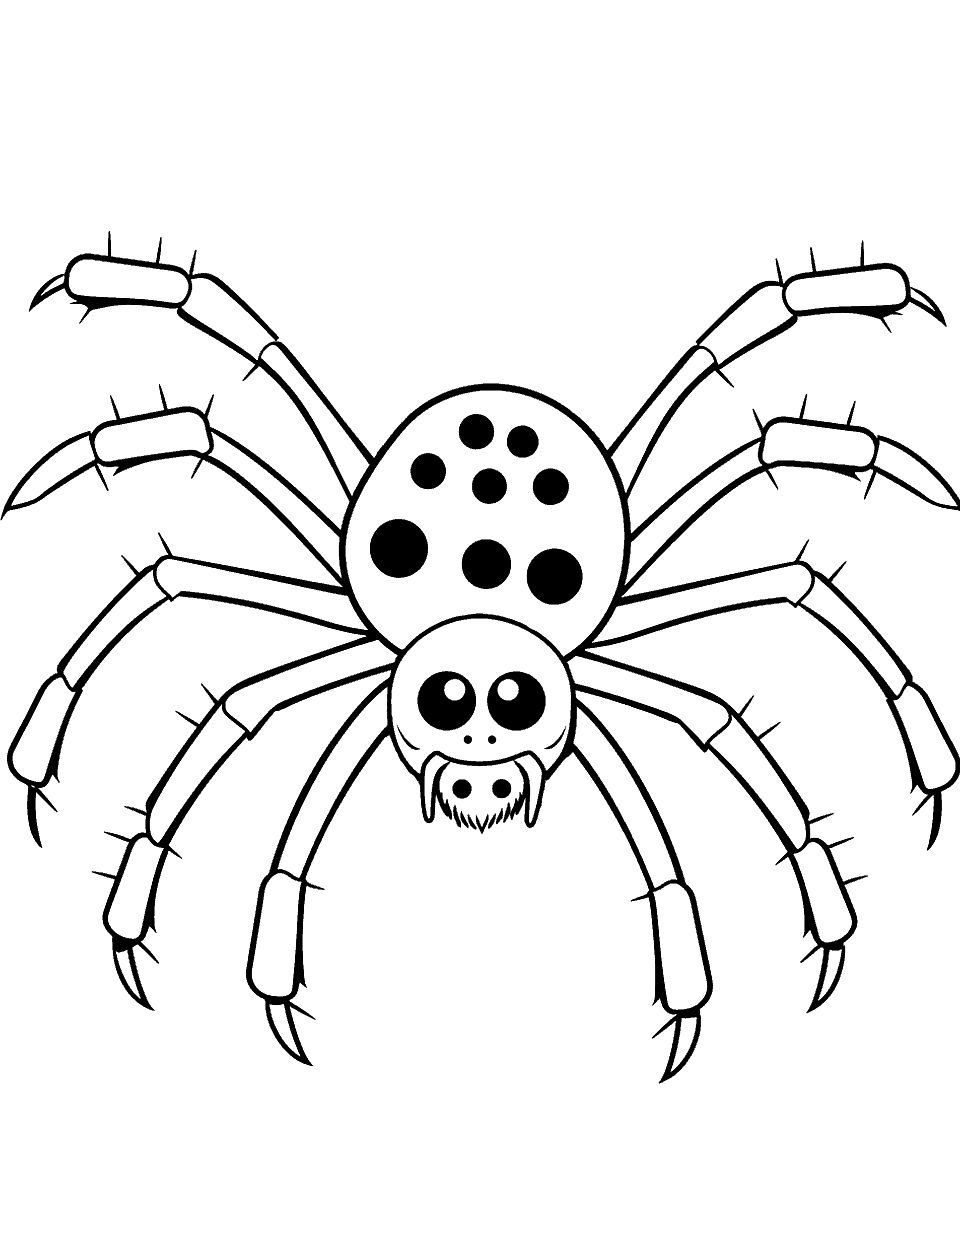 Spider with Polka Dots Coloring Page - A spider with fun, polka dots on its body.